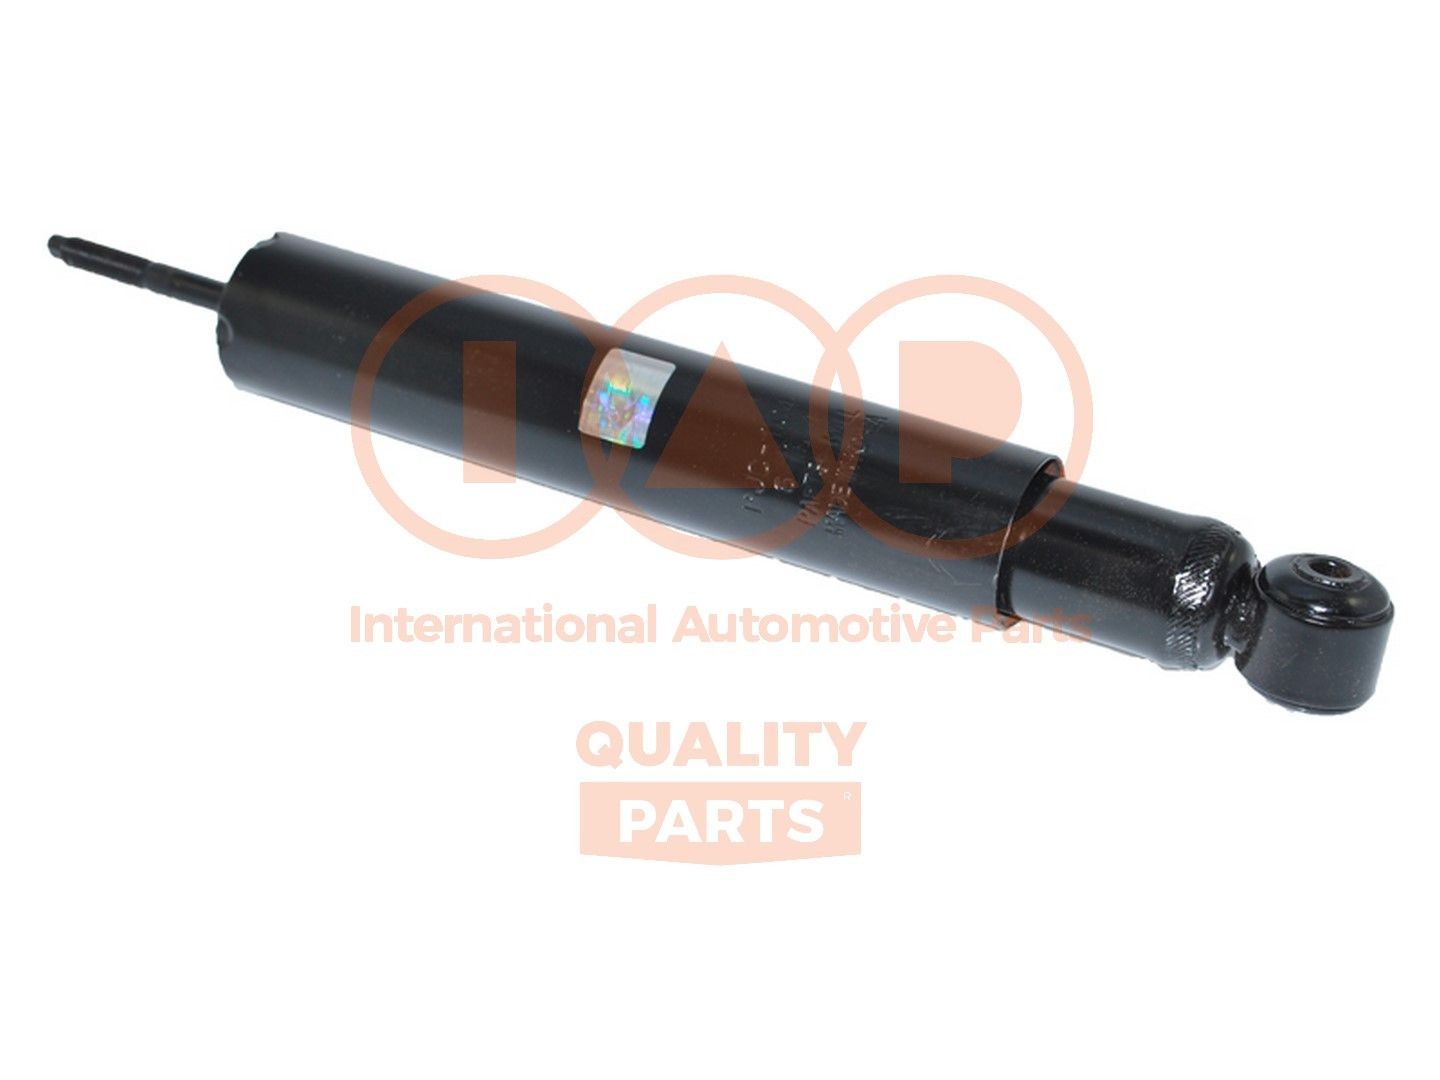 IAP QUALITY PARTS 504-20031 Shock absorber 720 81 670